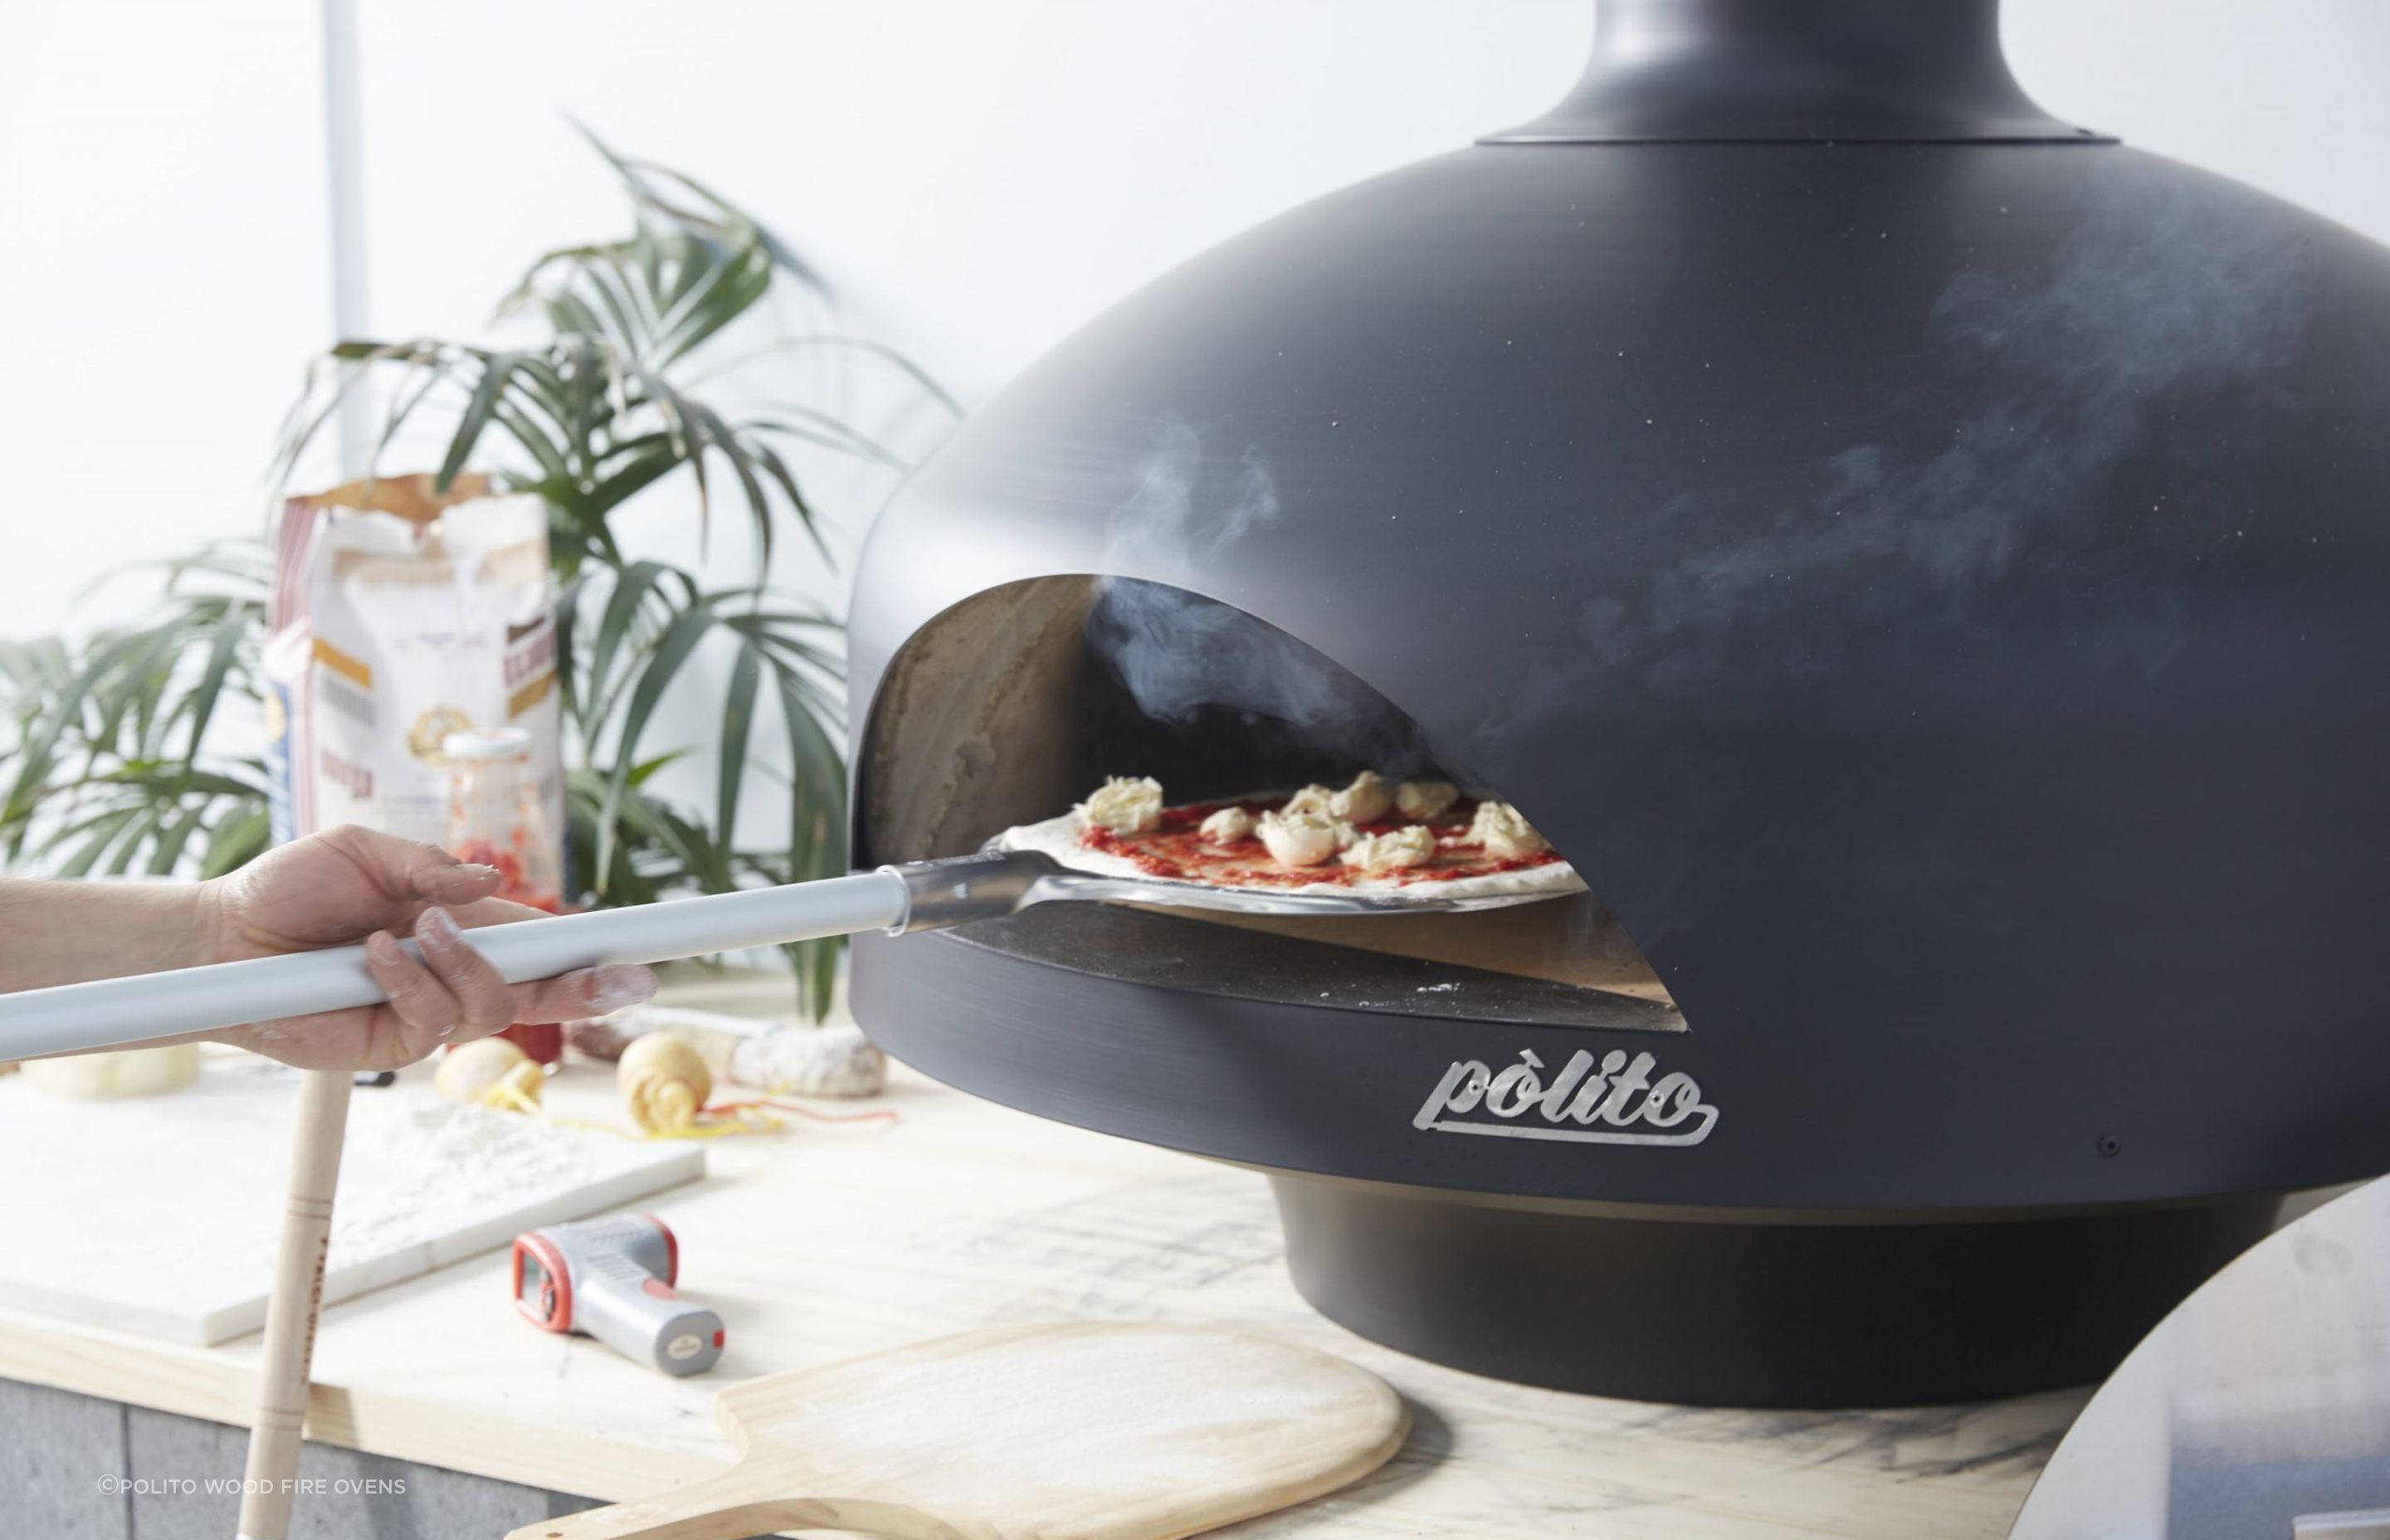 Waterproof and weather-proof, Polito’s exquisite Giotto wood-fired pizza oven is perfect for the outdoors